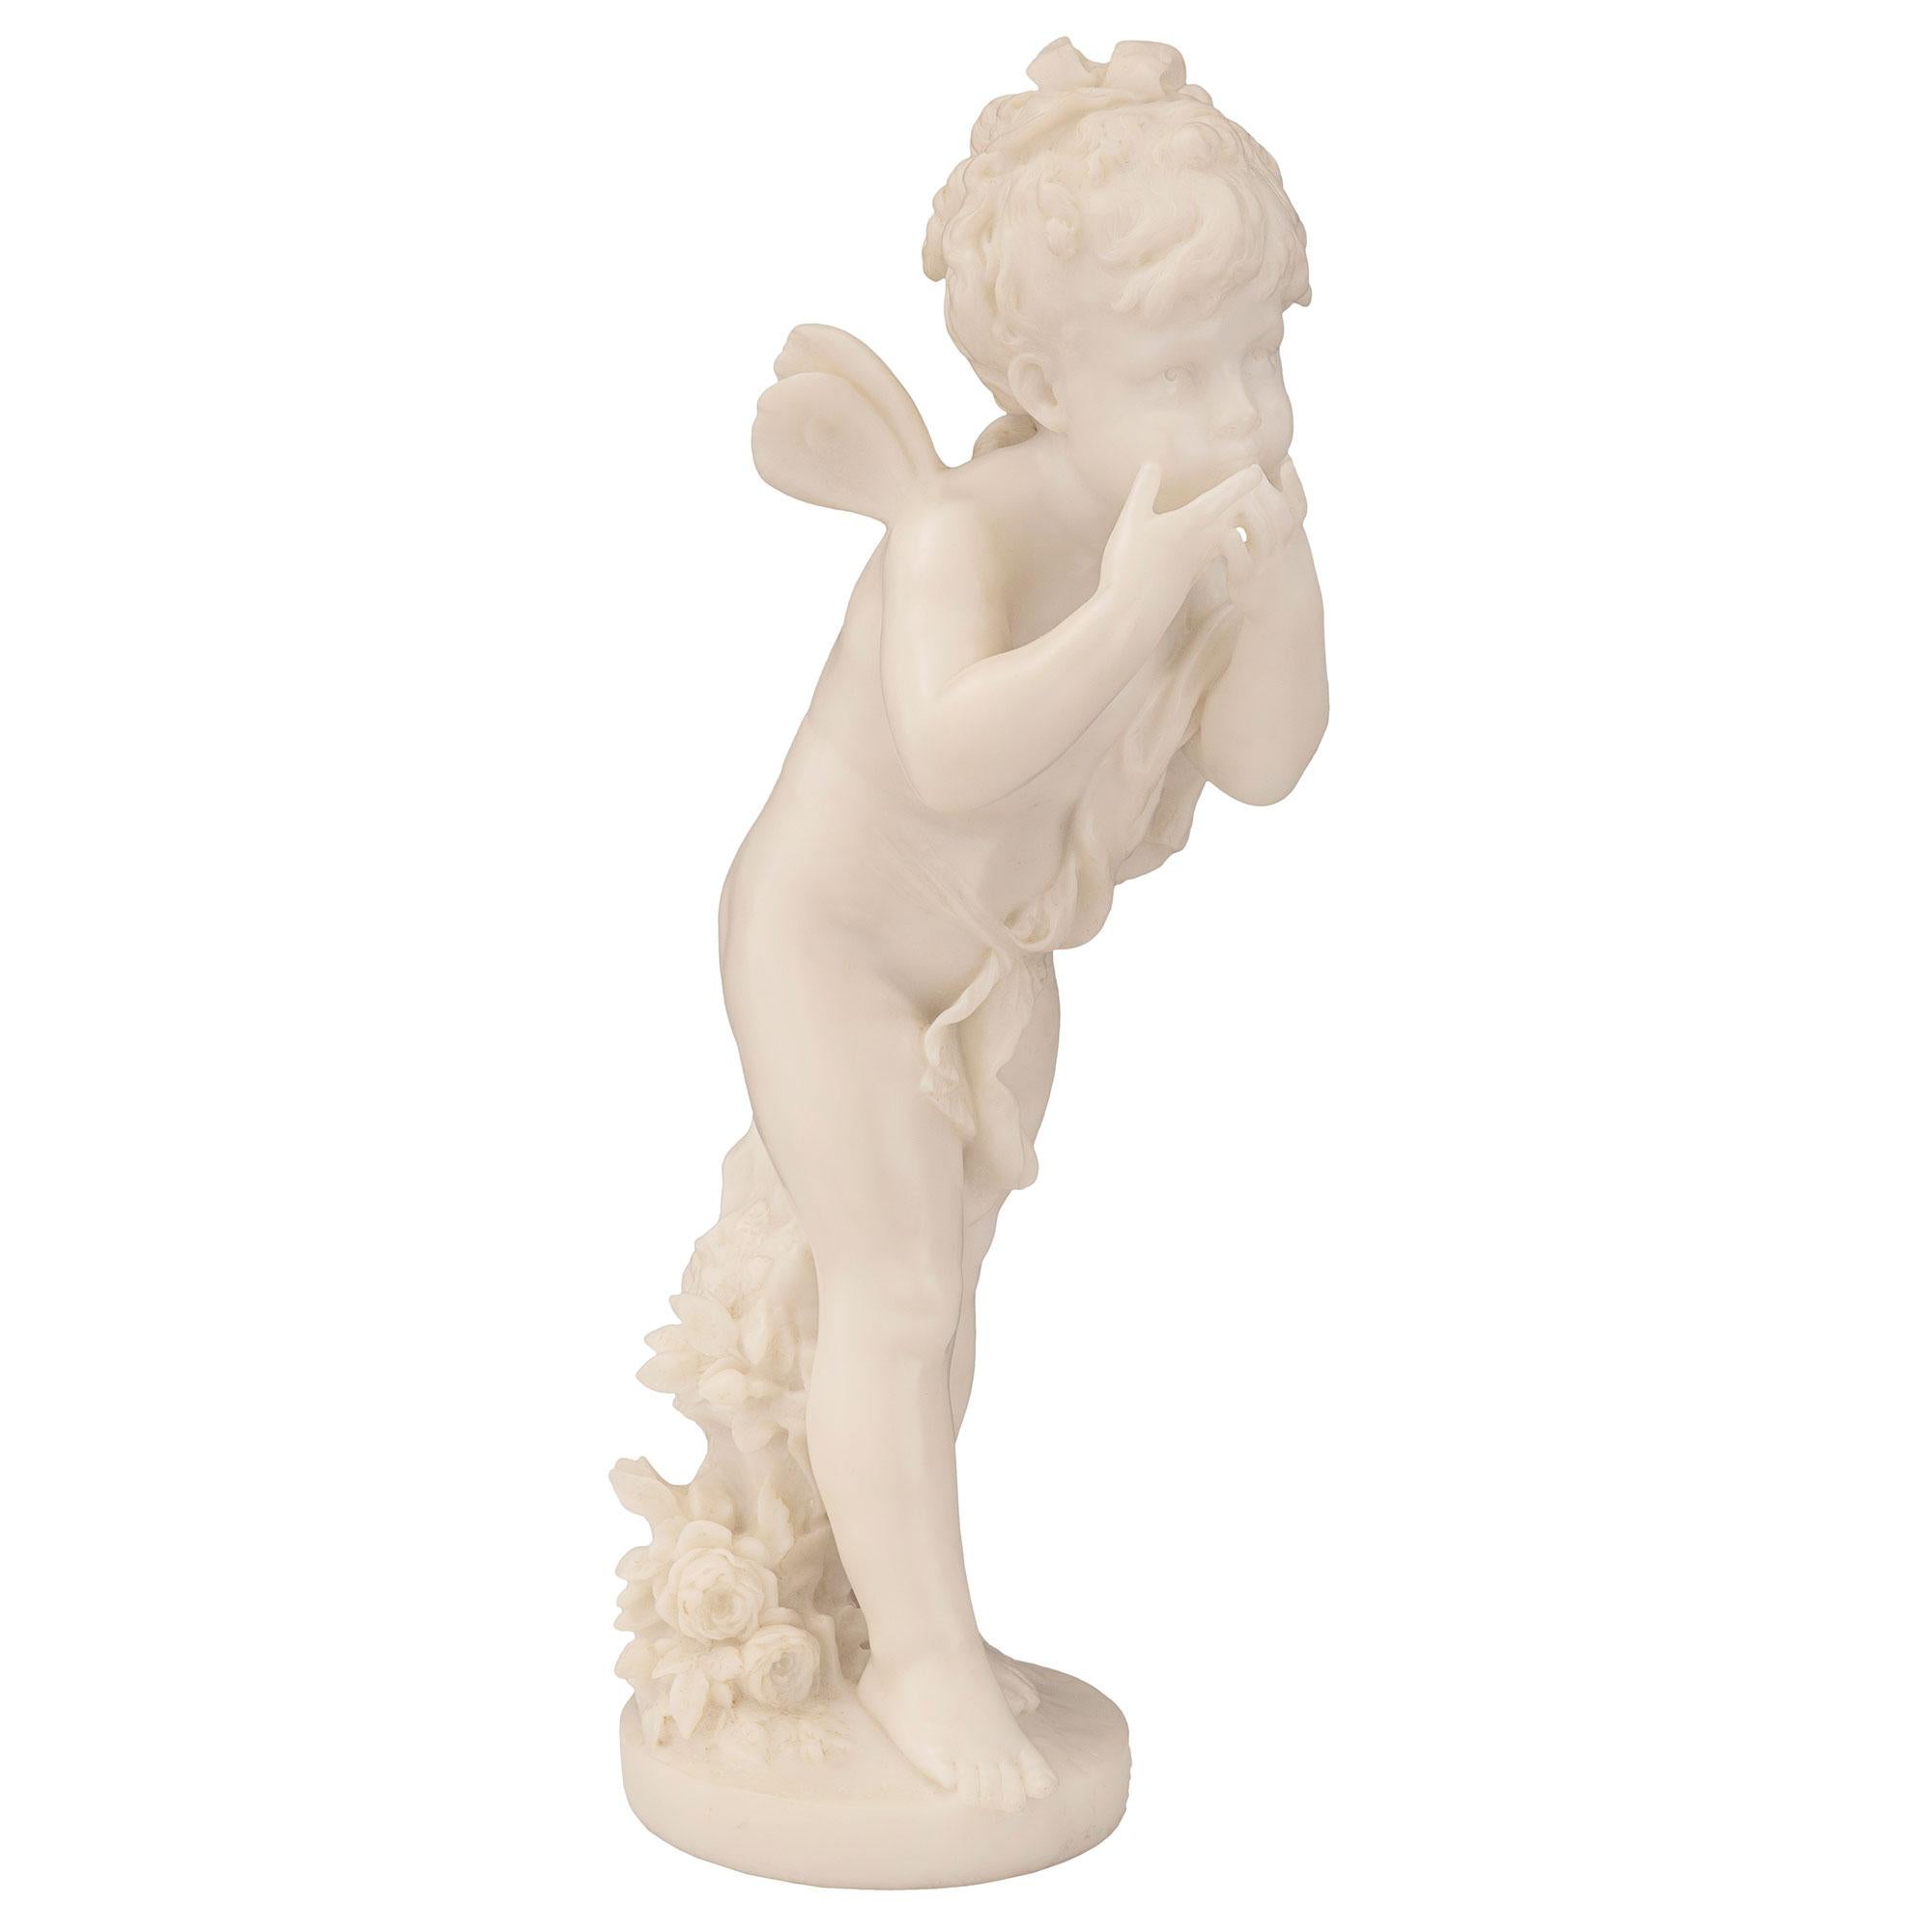 An absolutely charming and well executed Italian mid-19th century white Carrara marble statue of winged girl. The young maiden is standing above a circular base with a richly carved bouquet of flowers. She is holding up her arms to her face as if